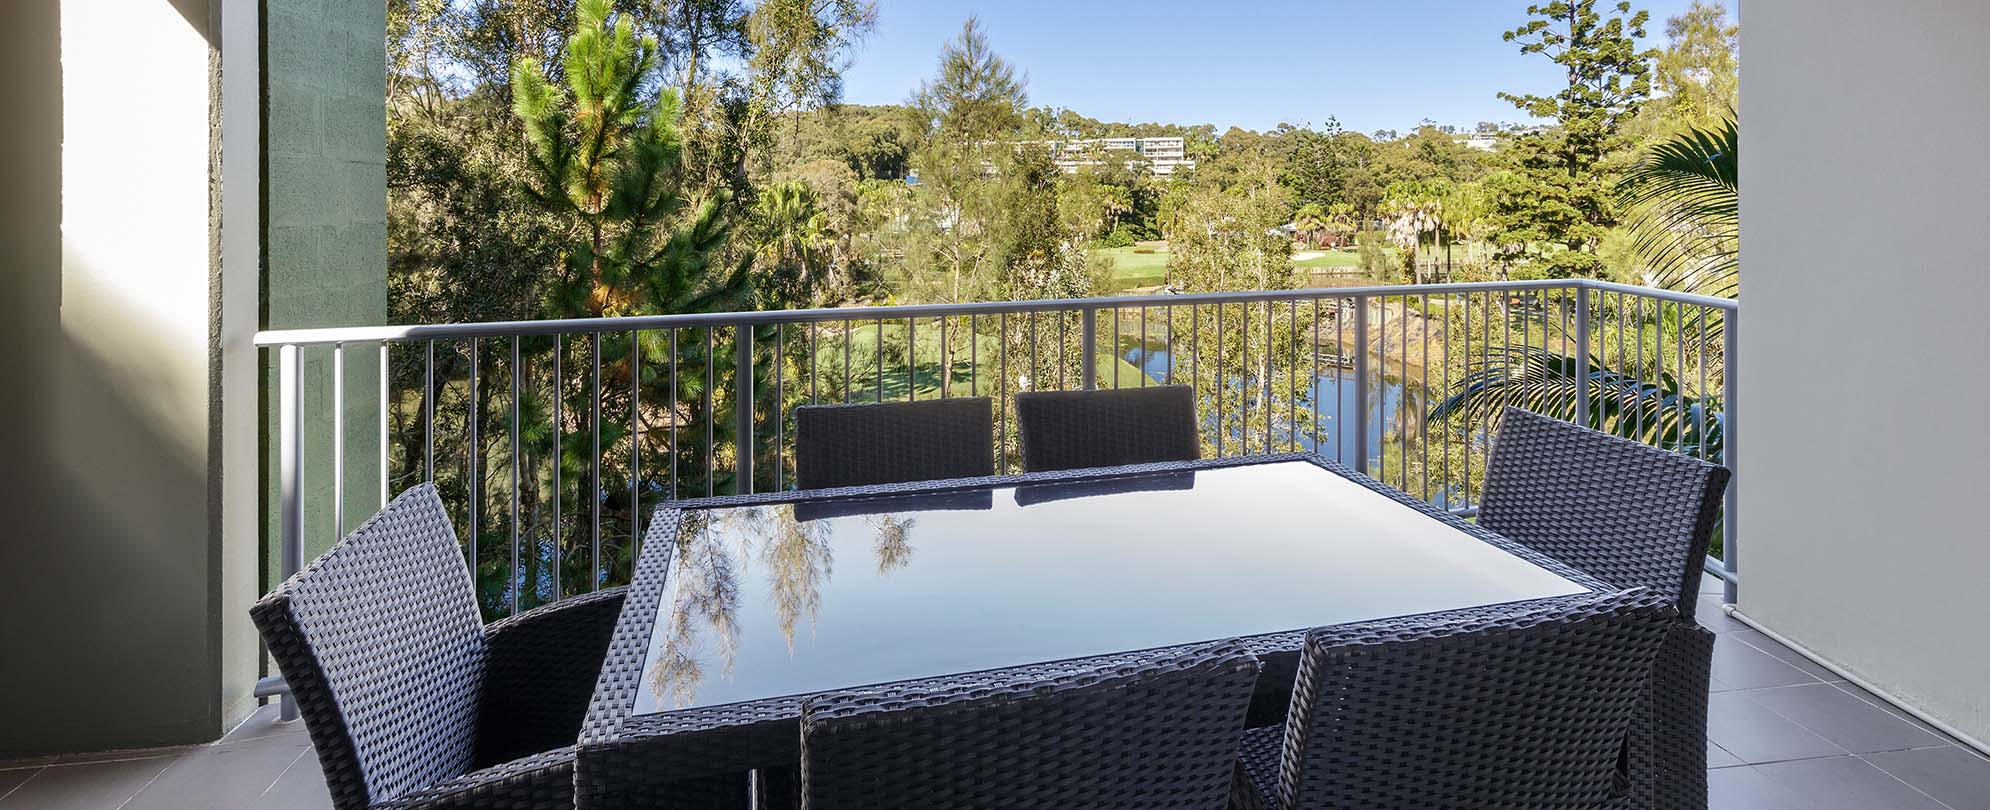 A table with six chairs out on the balcony of a 2-bedroom grand suite at Club Wyndham Coffs Harbor.